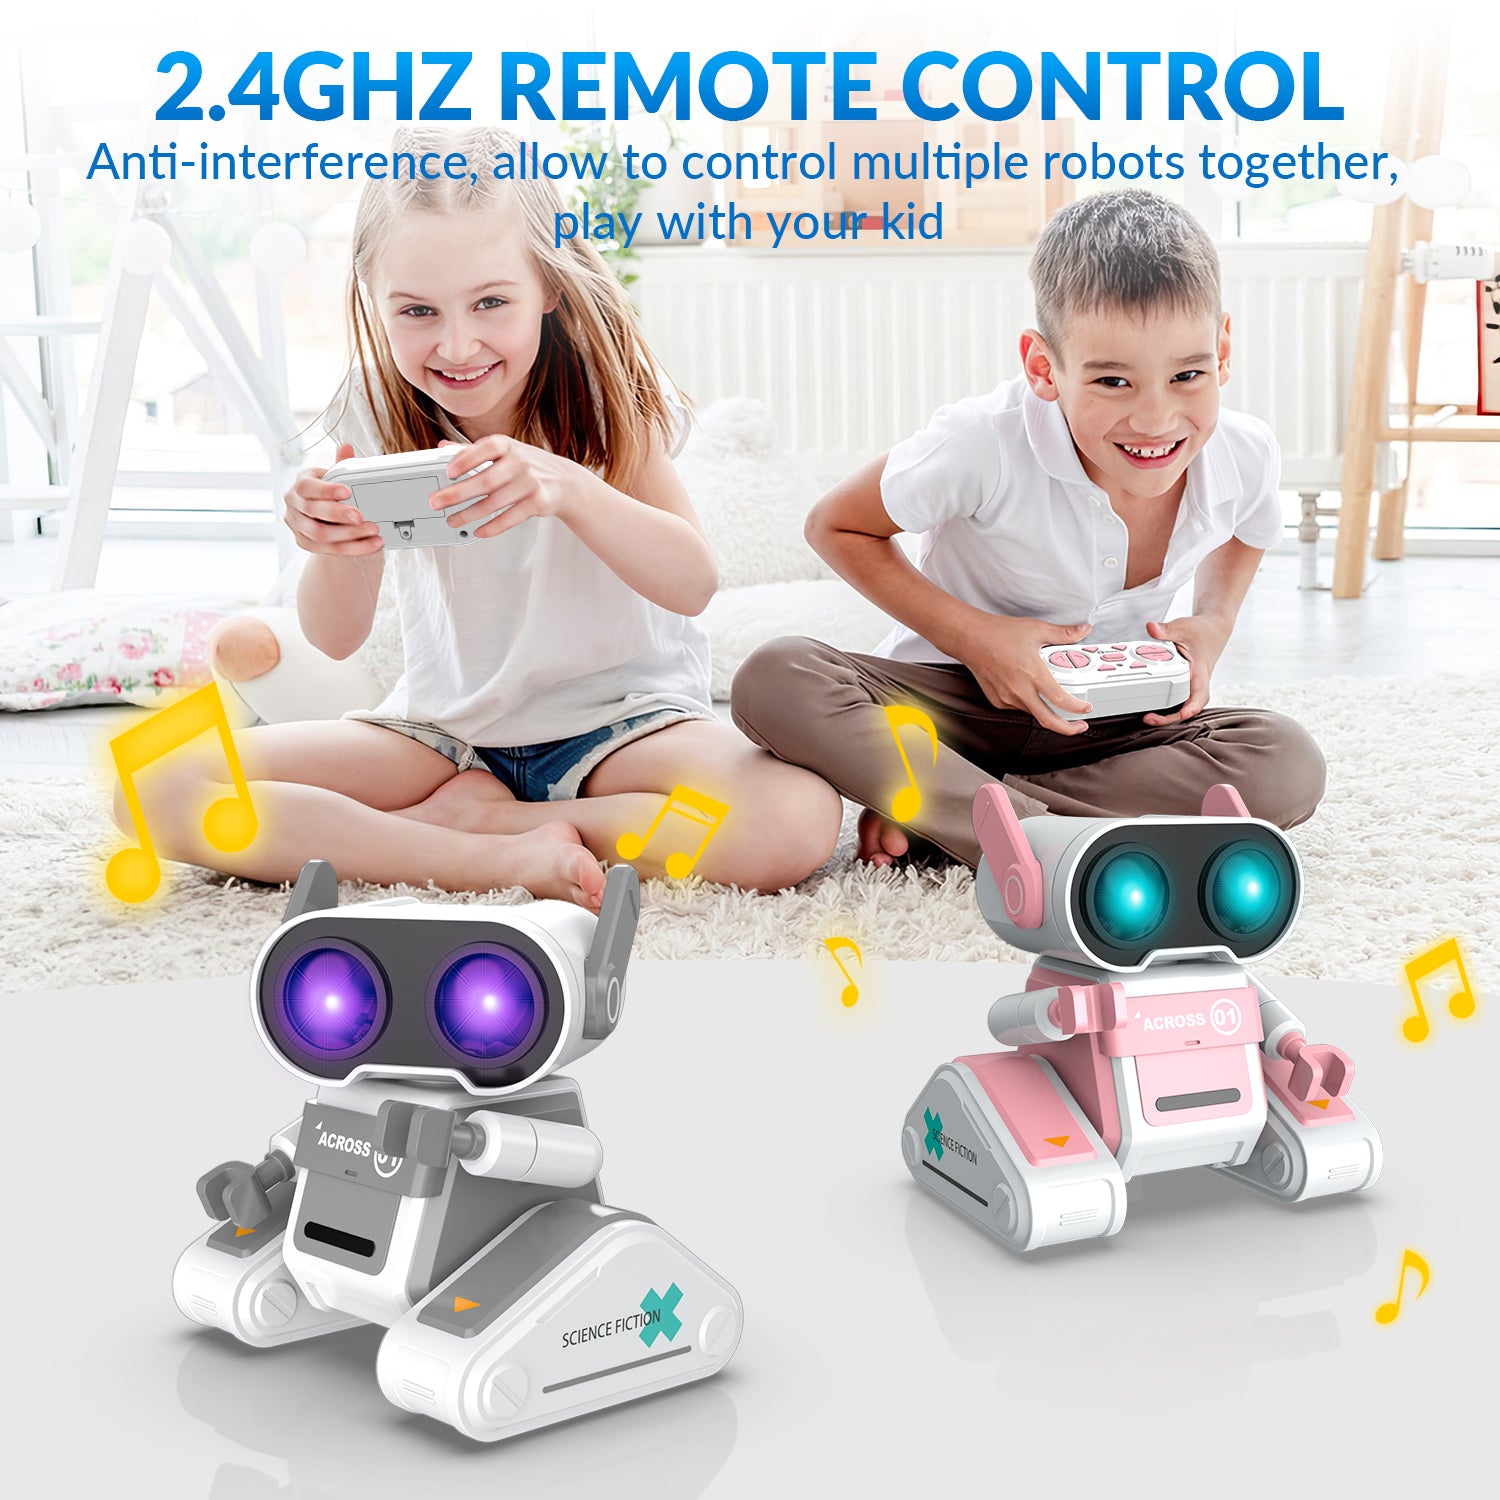 STEMTRON Intelligent Voice Controlled Smart RC Robot-EXHOBBY